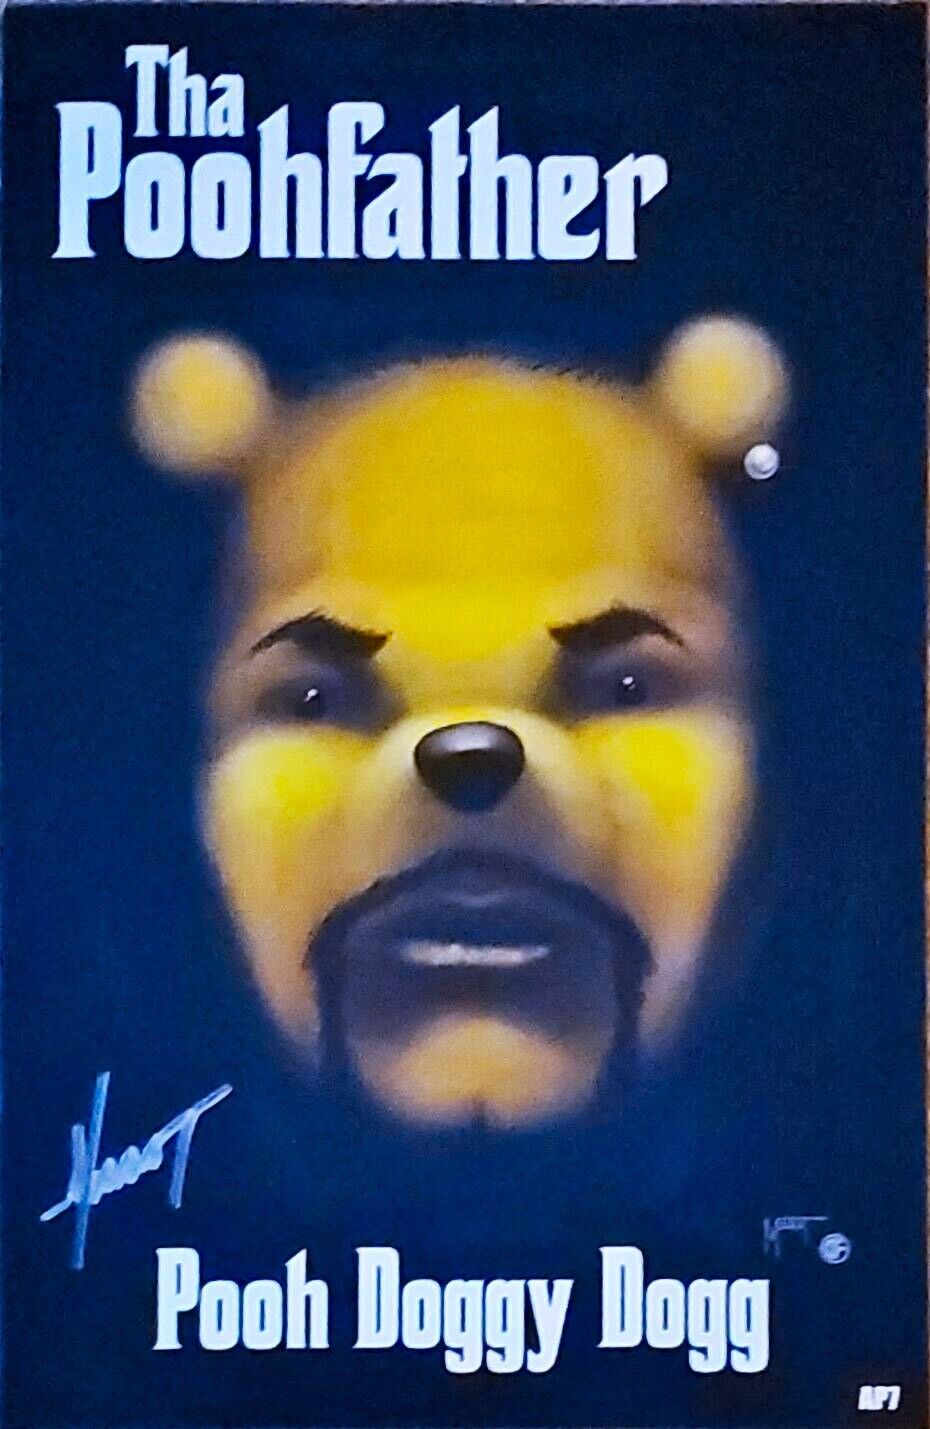 DO YOU POOH - Tha Poohfather [ Snoop Dogg Homage ] [ Pooh Doggy Dog ] AP7 Signed